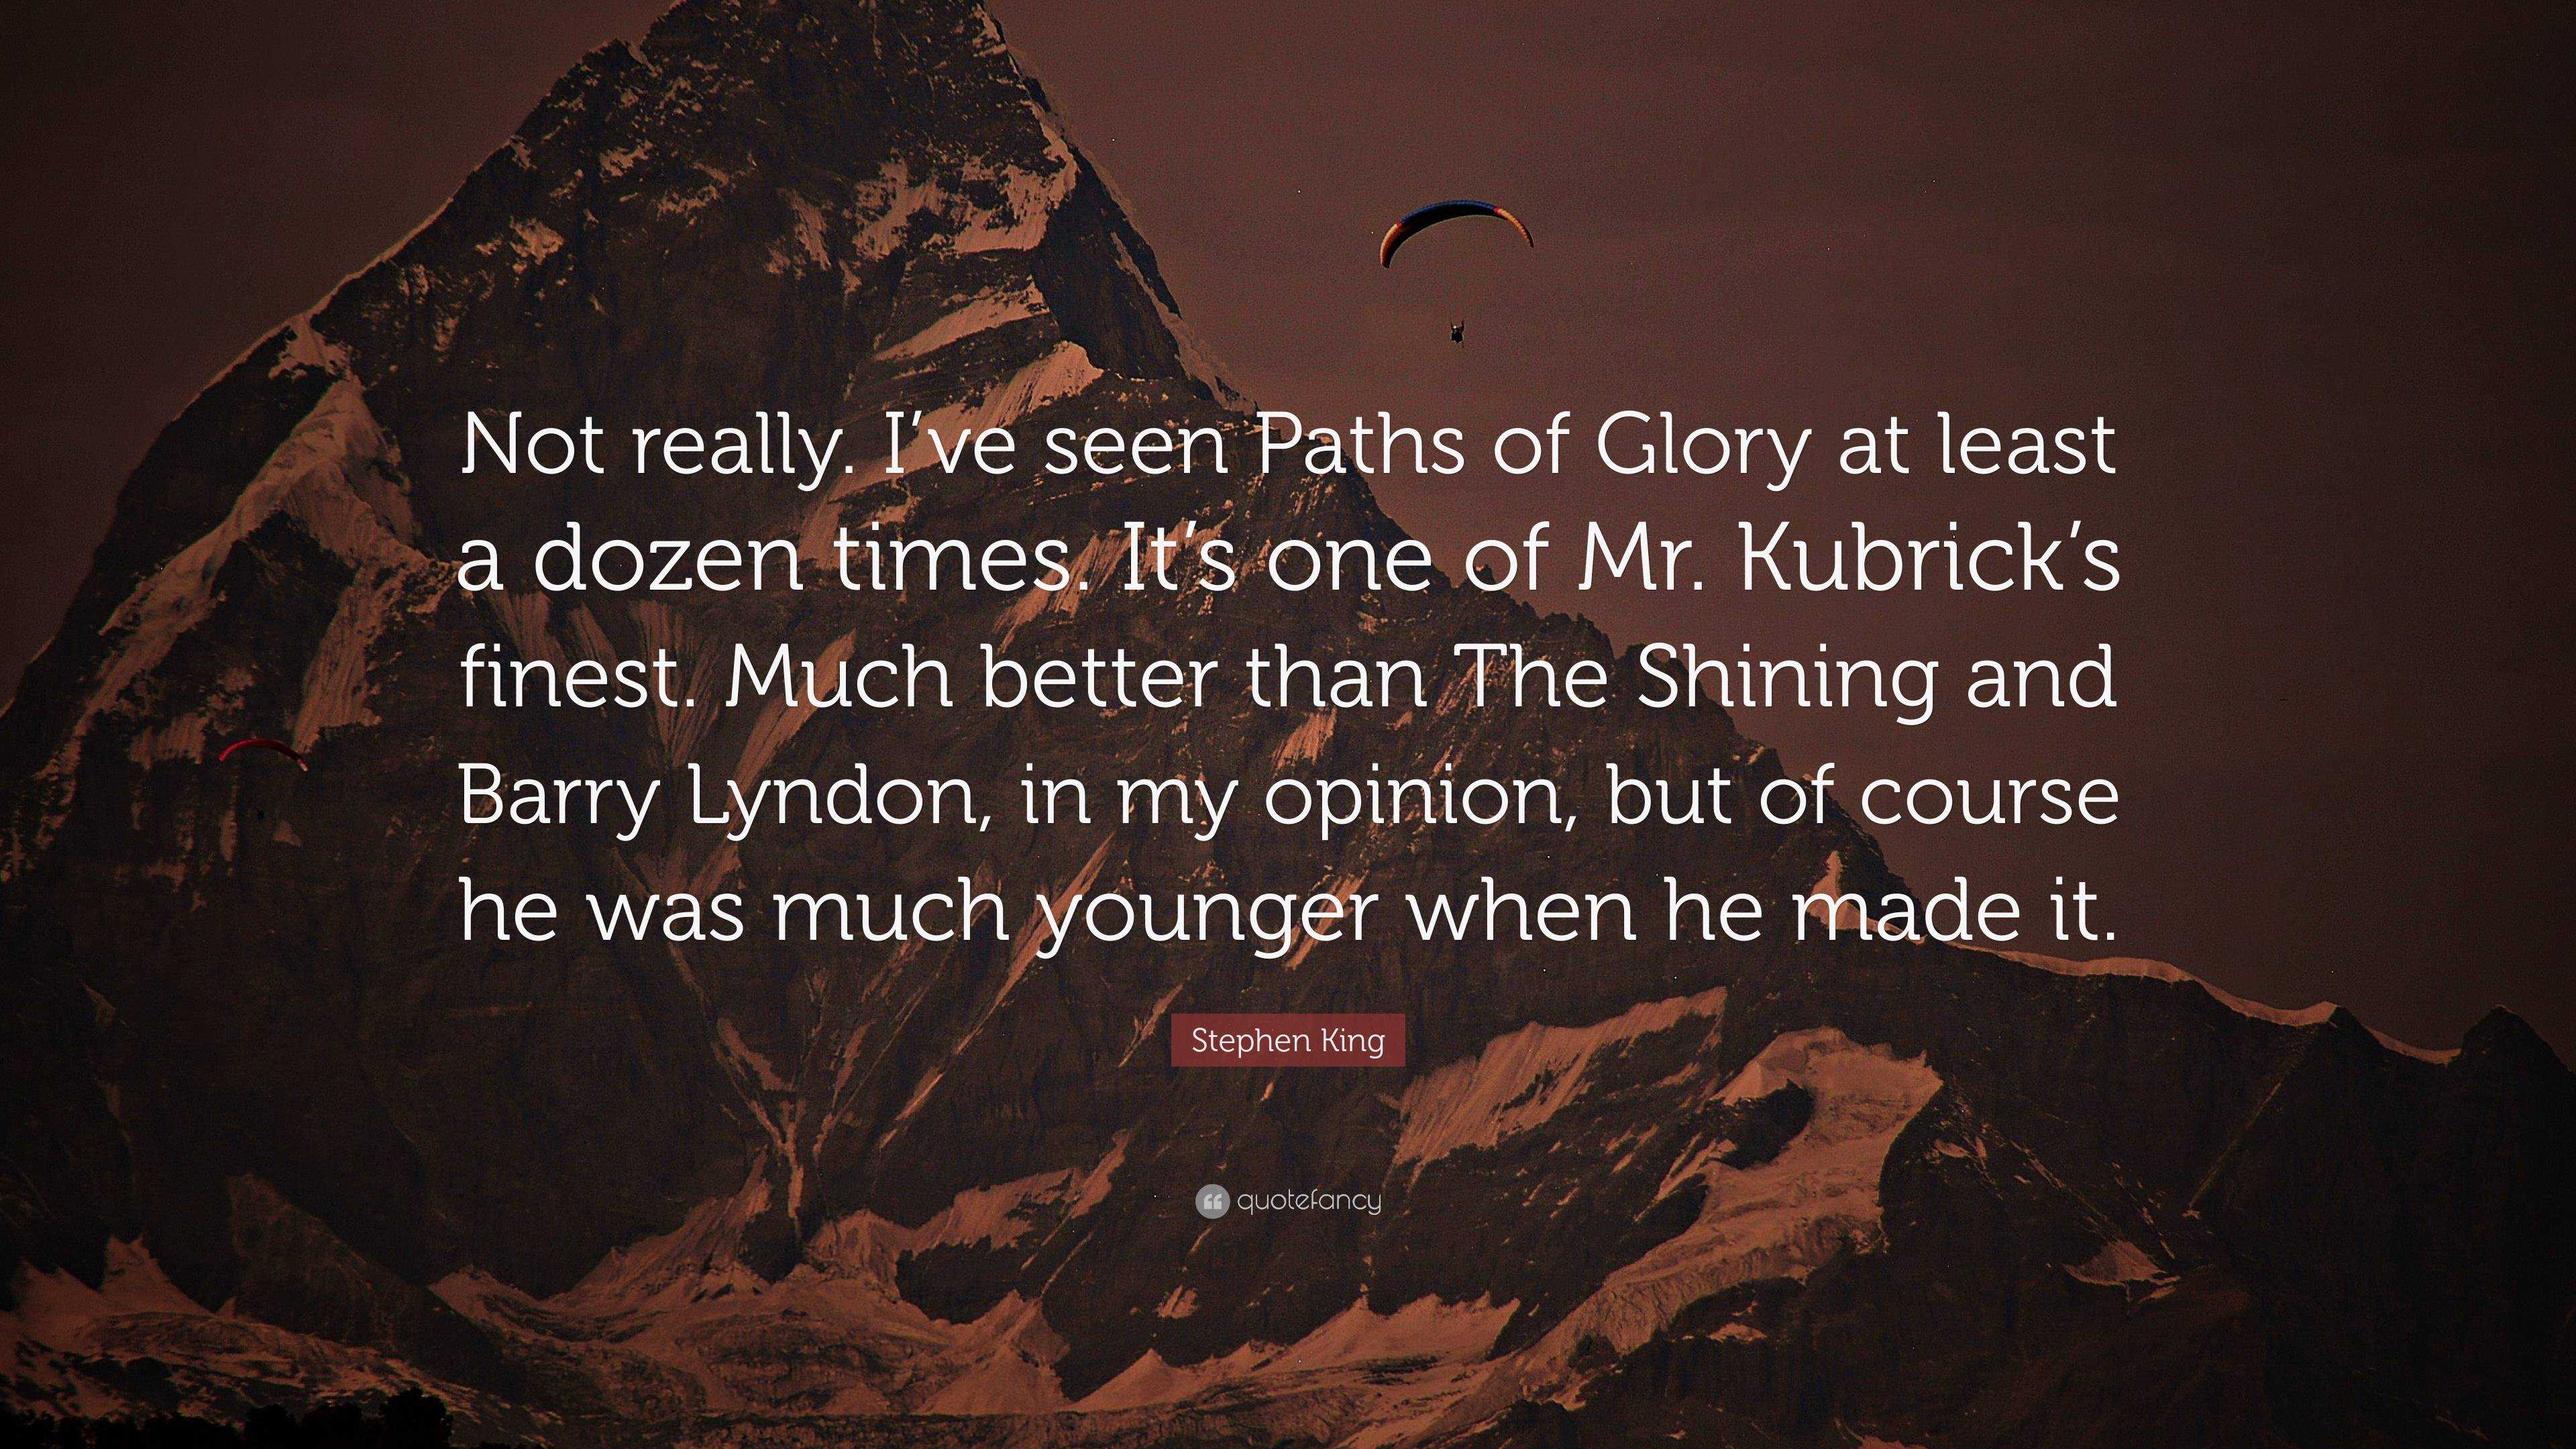 Stephen King Quote: “Not really. I've seen Paths of Glory at least a dozen  times. It's one of Mr. Kubrick's finest. Much better than The Shin”